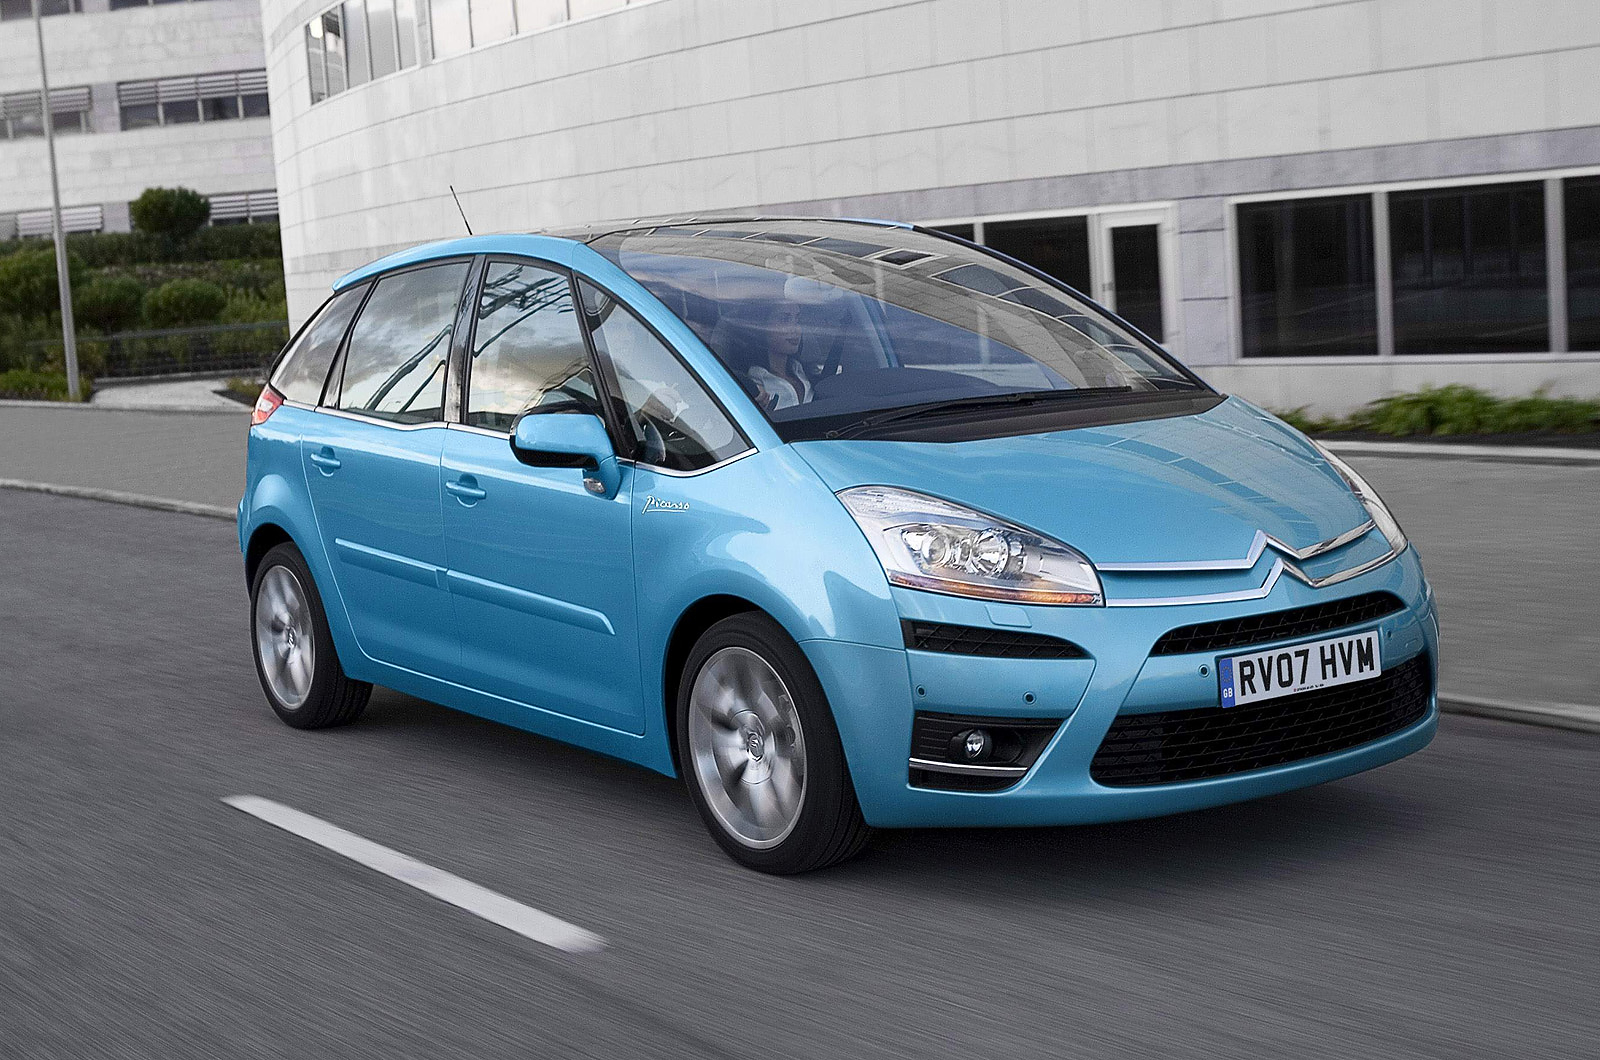 CITROEN GRAND C4 PICASSO 2011 FULL REVIEW - CAR & DRIVING 